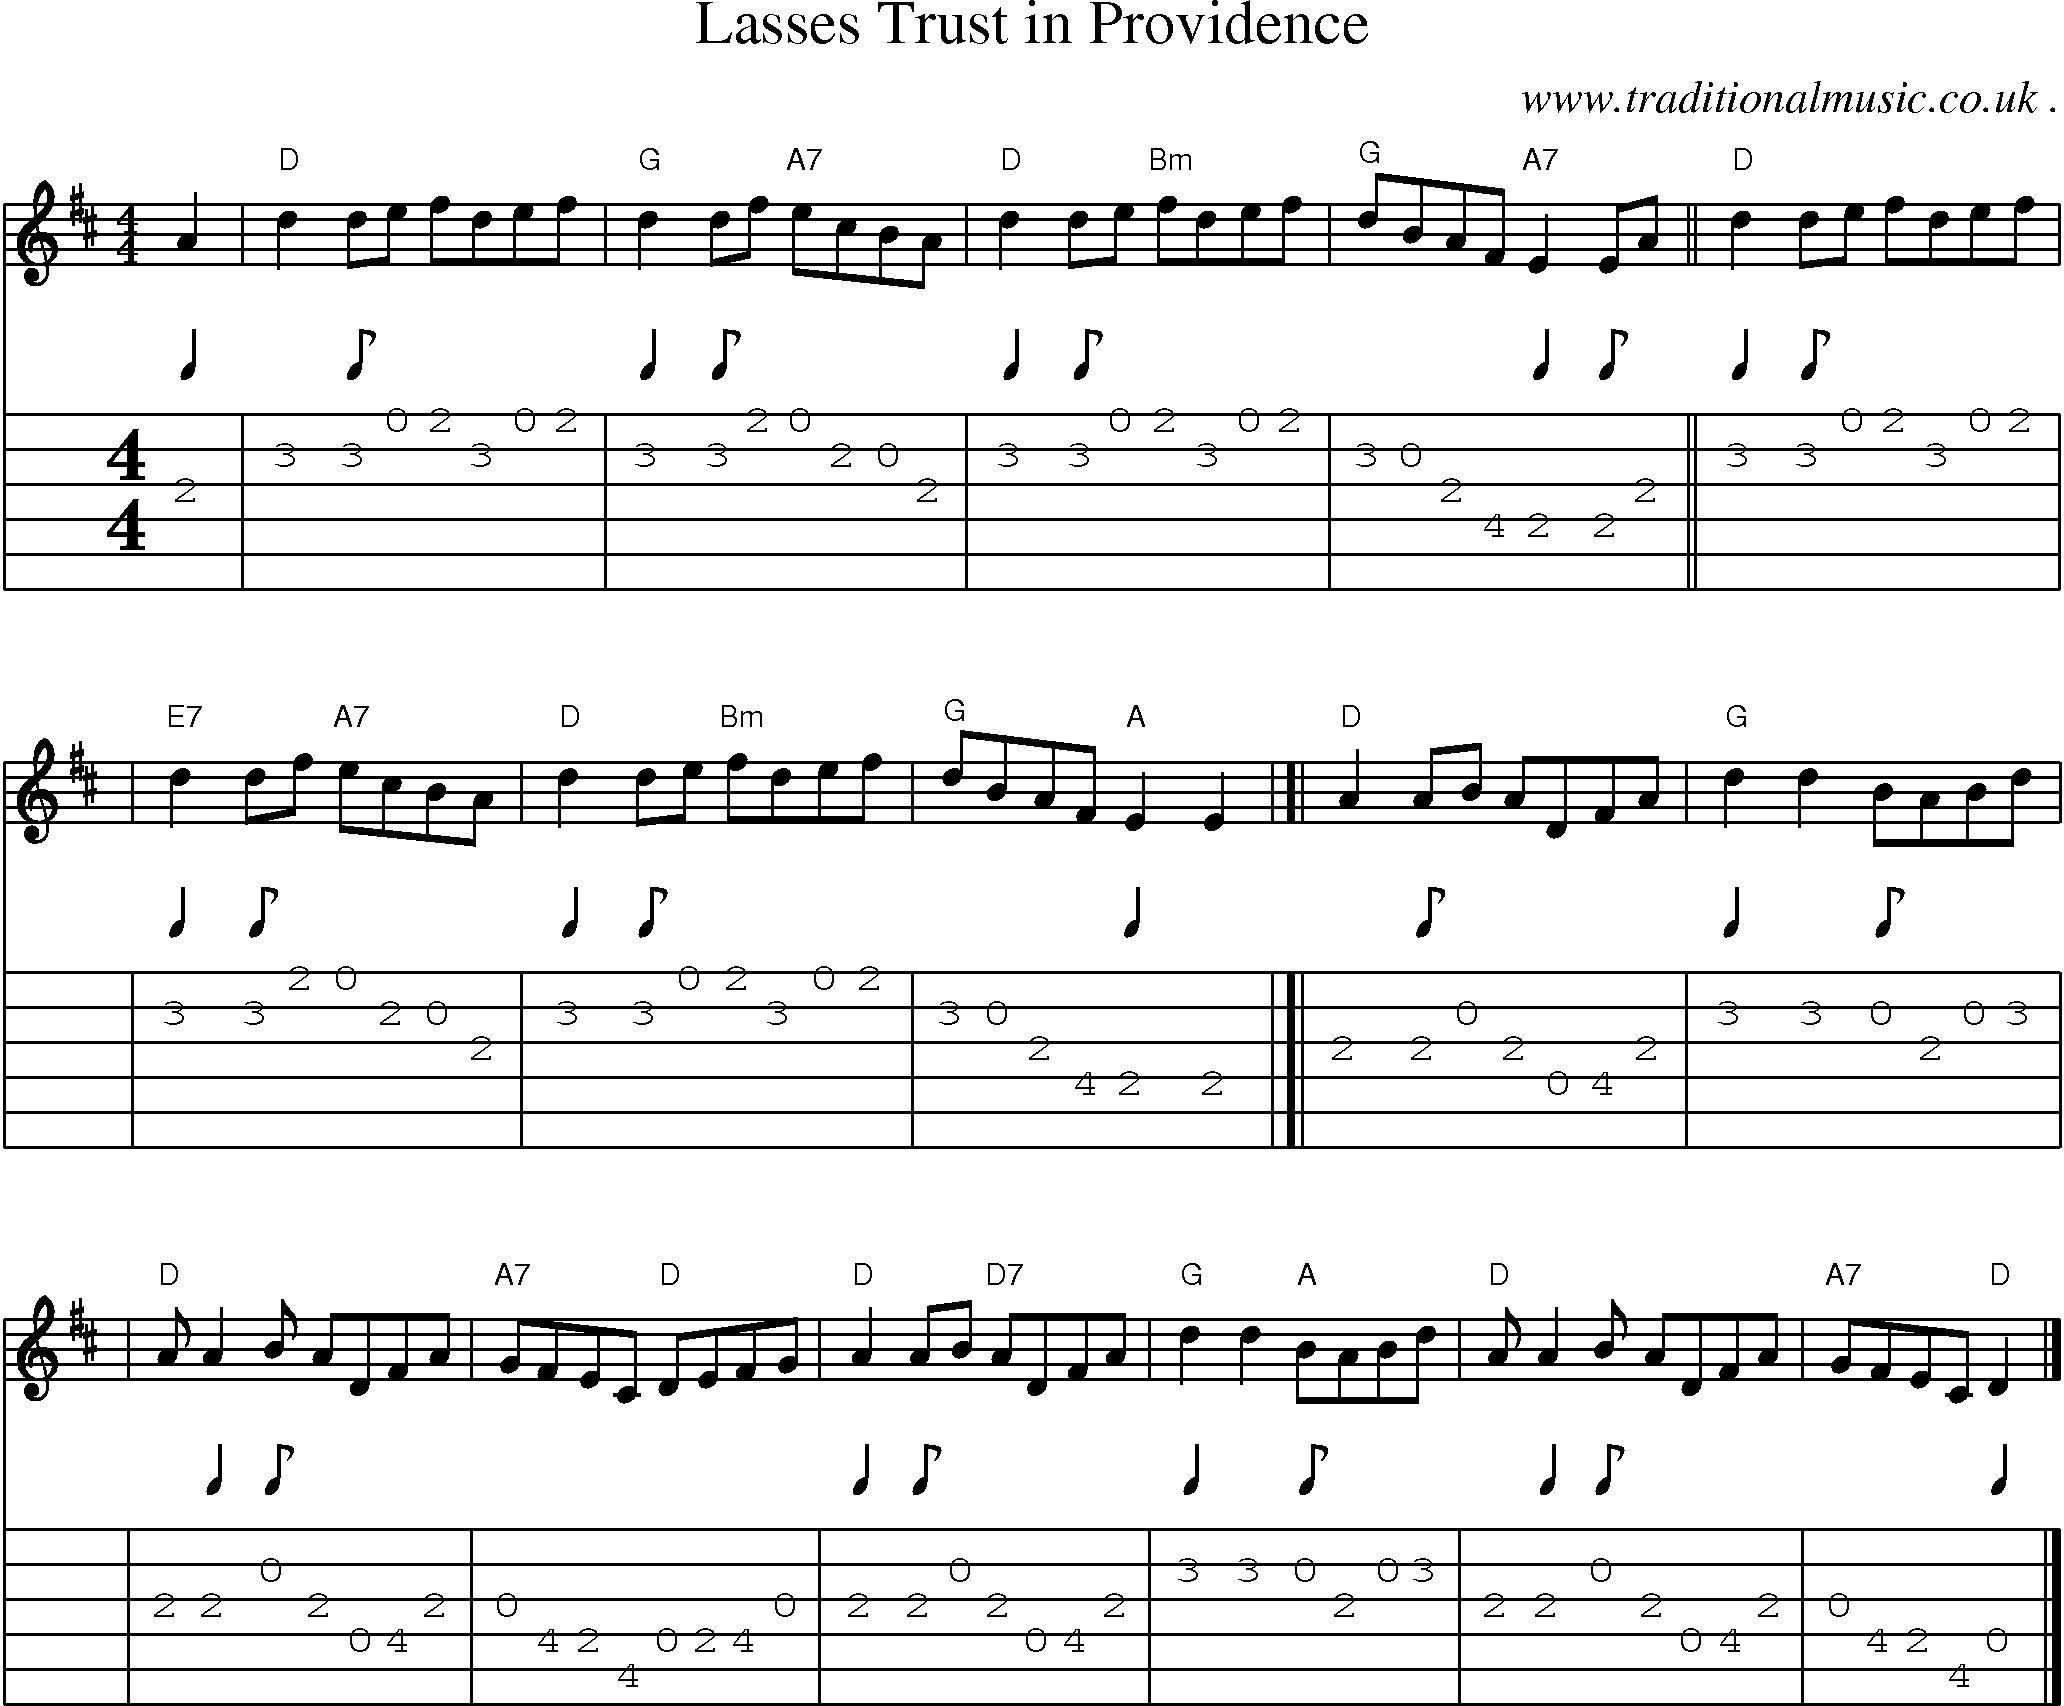 Sheet-music  score, Chords and Guitar Tabs for Lasses Trust In Providence